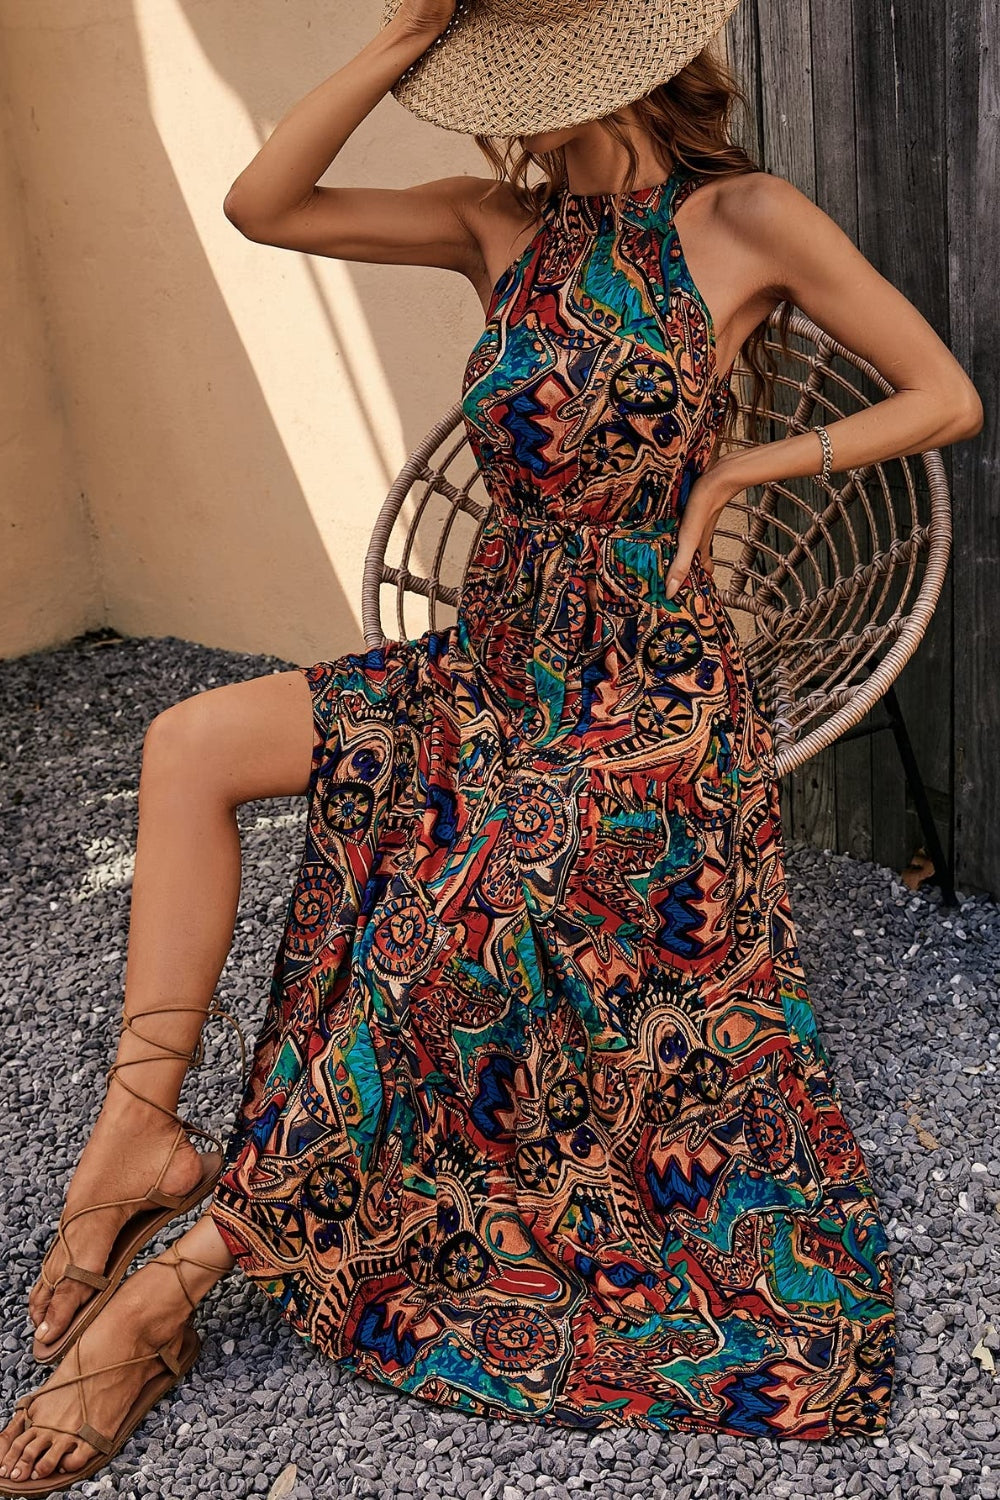 gorgeous halter maxi dress in a variety of colorful prints. Southwestern vibe with jeweled blue rust navy peach and black colors. Perfect for an evening out or a special daytime event